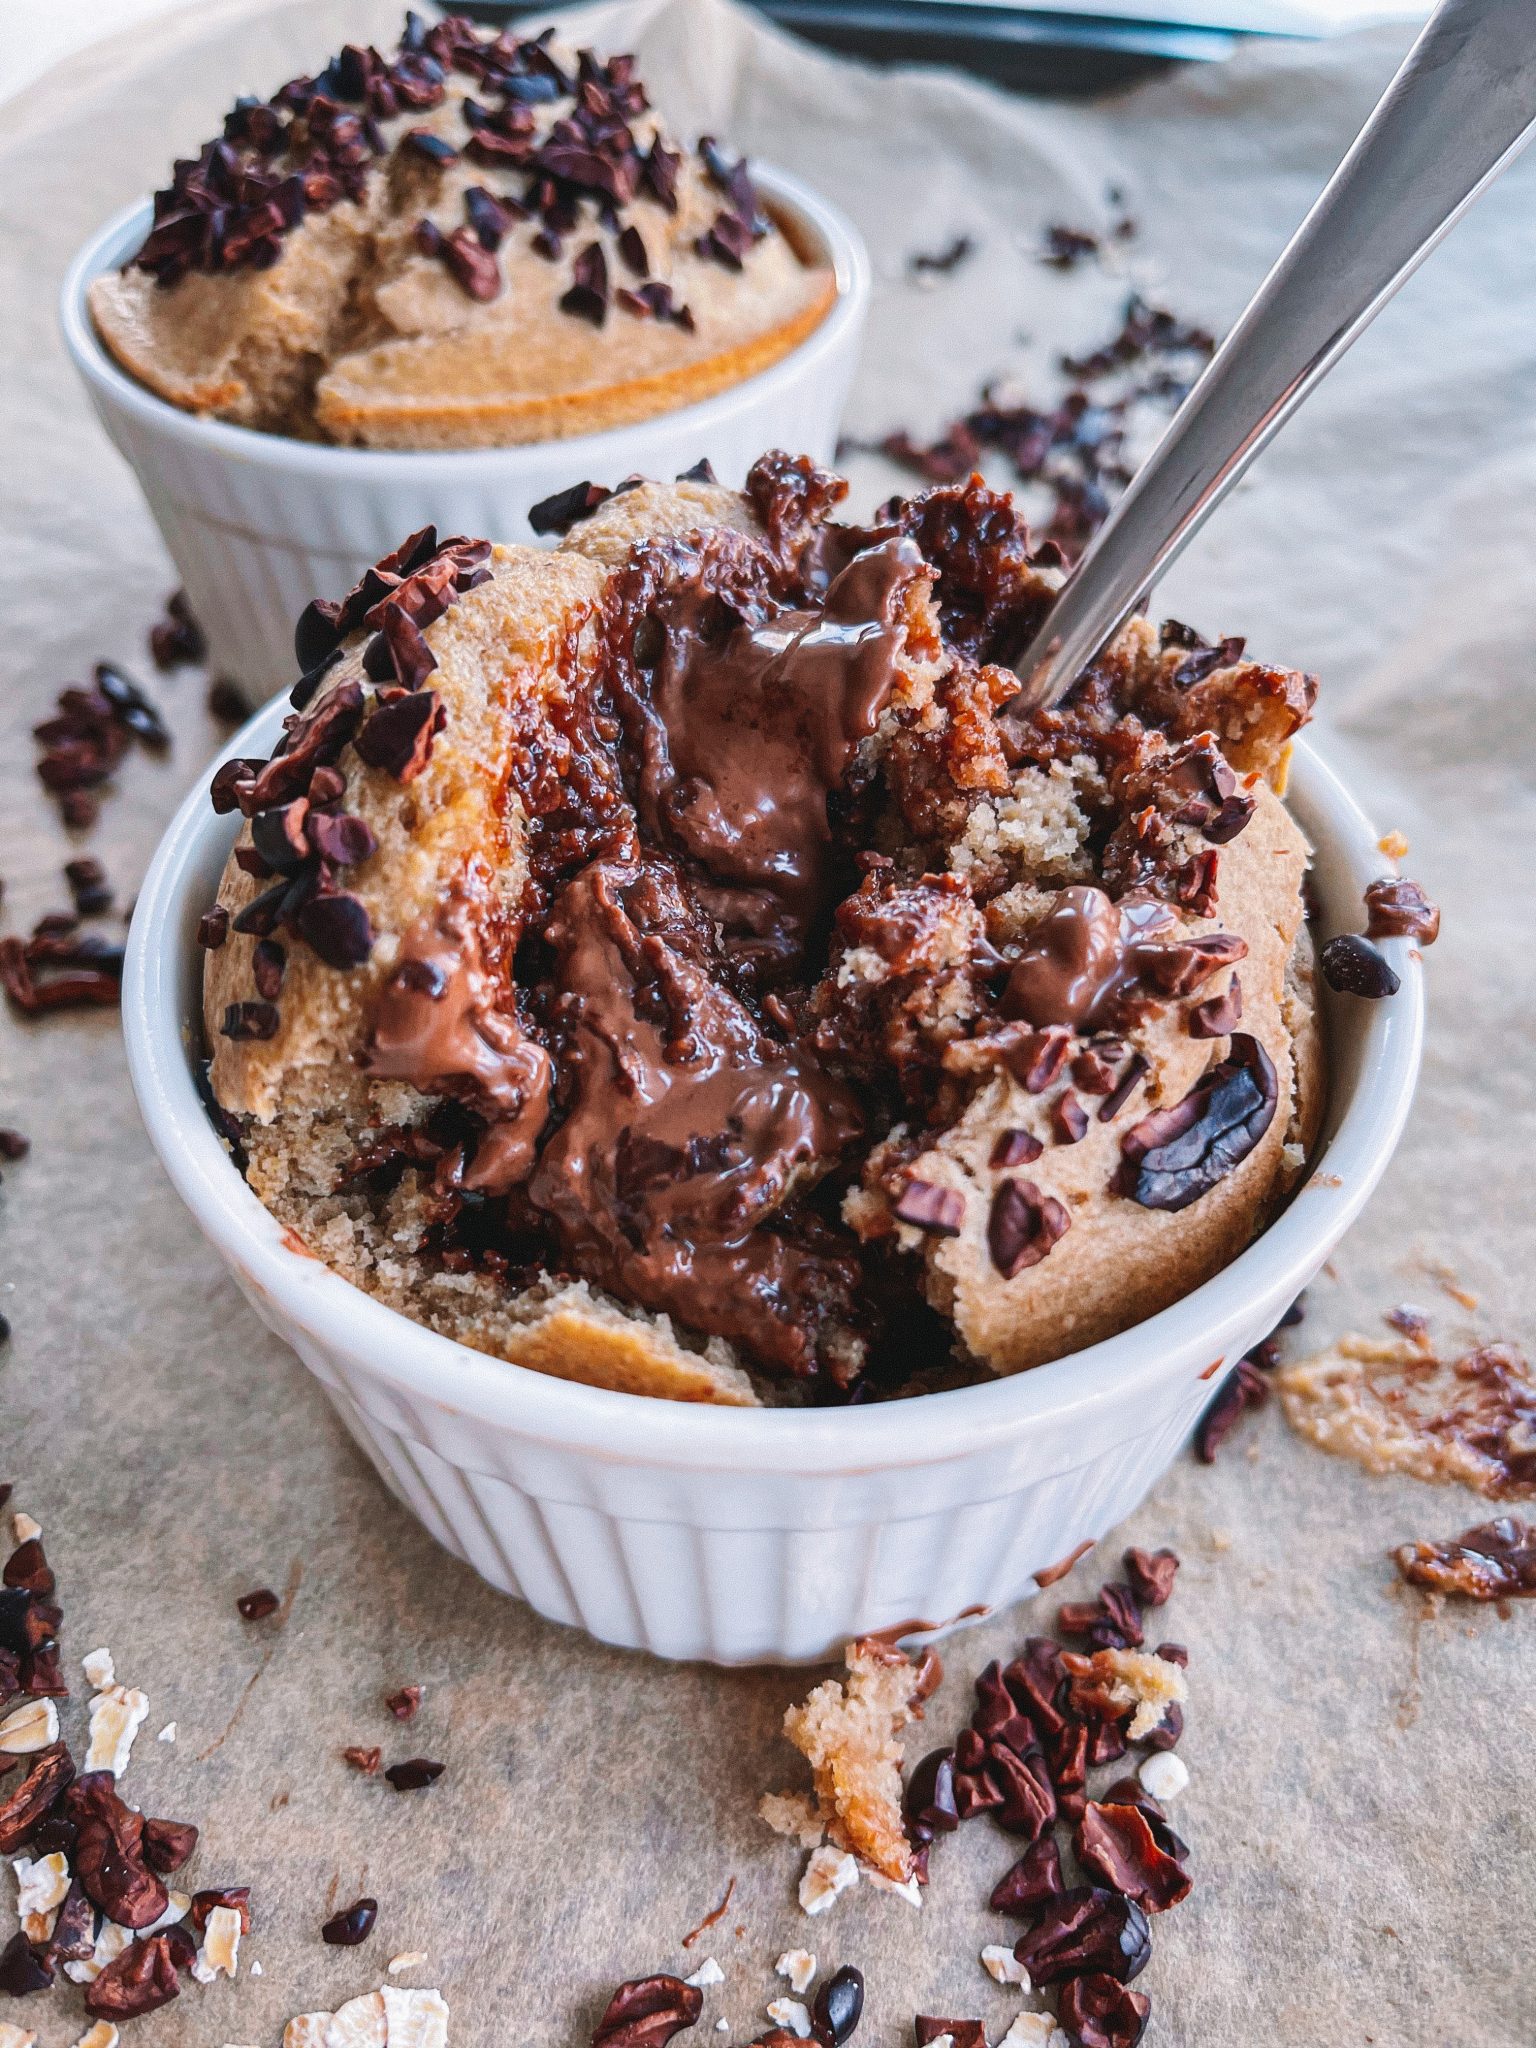 VIRAL BAKED OATS RECIPE WITH NUTELLA - Everything Delish